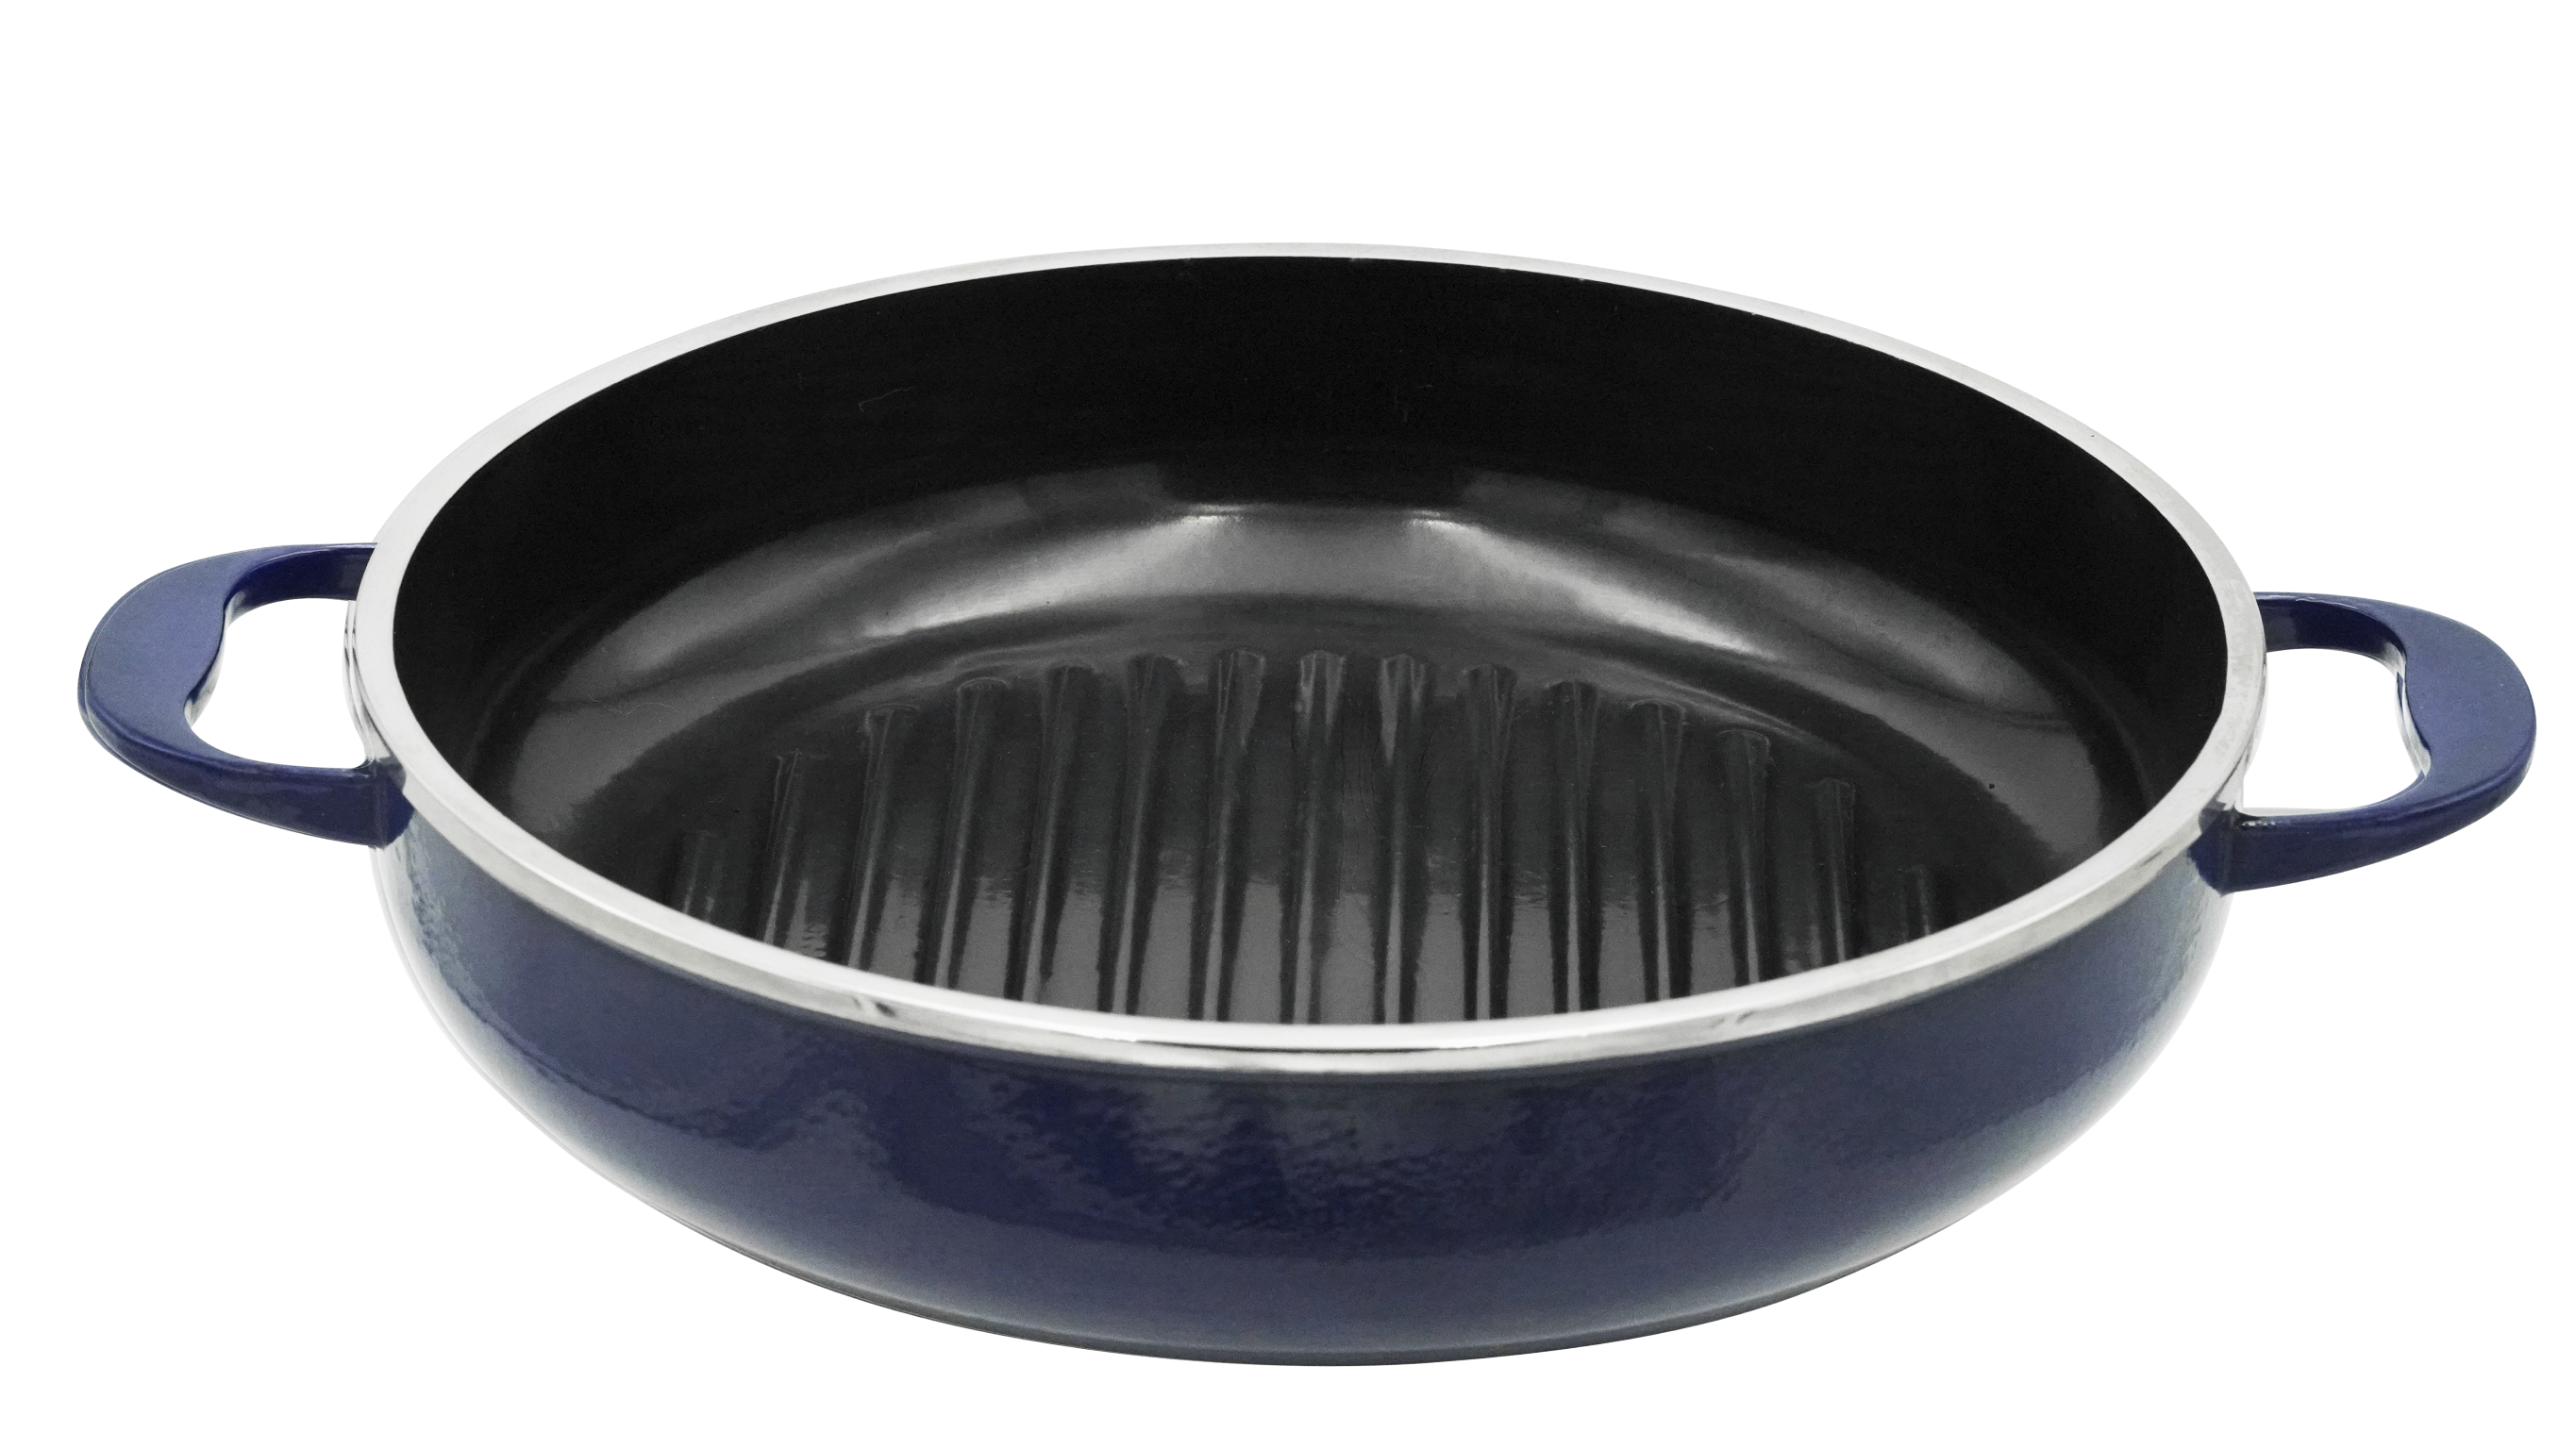 Hesslebach: Truly Non-Toxic Cookware- Dutch Oven, Grill, Pan